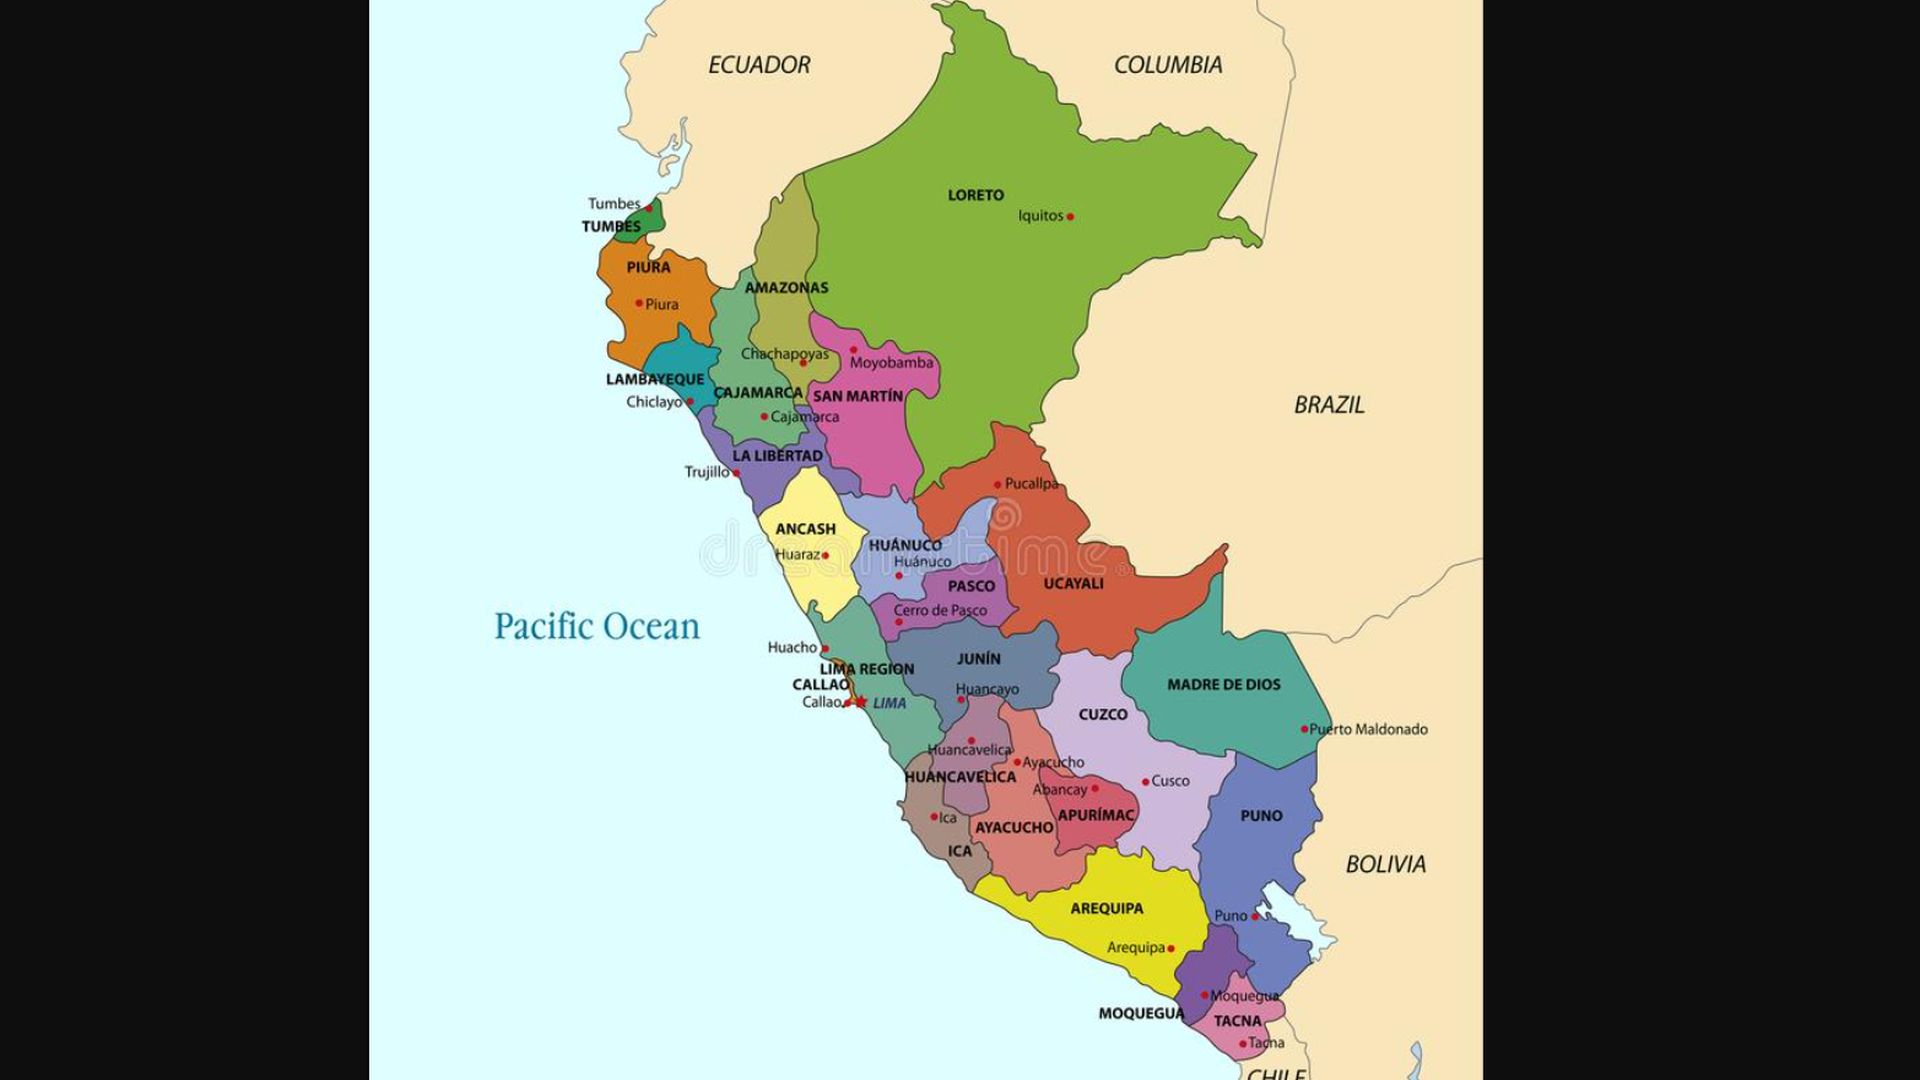 Peru current map of the regions and their capitals(dreamstime)